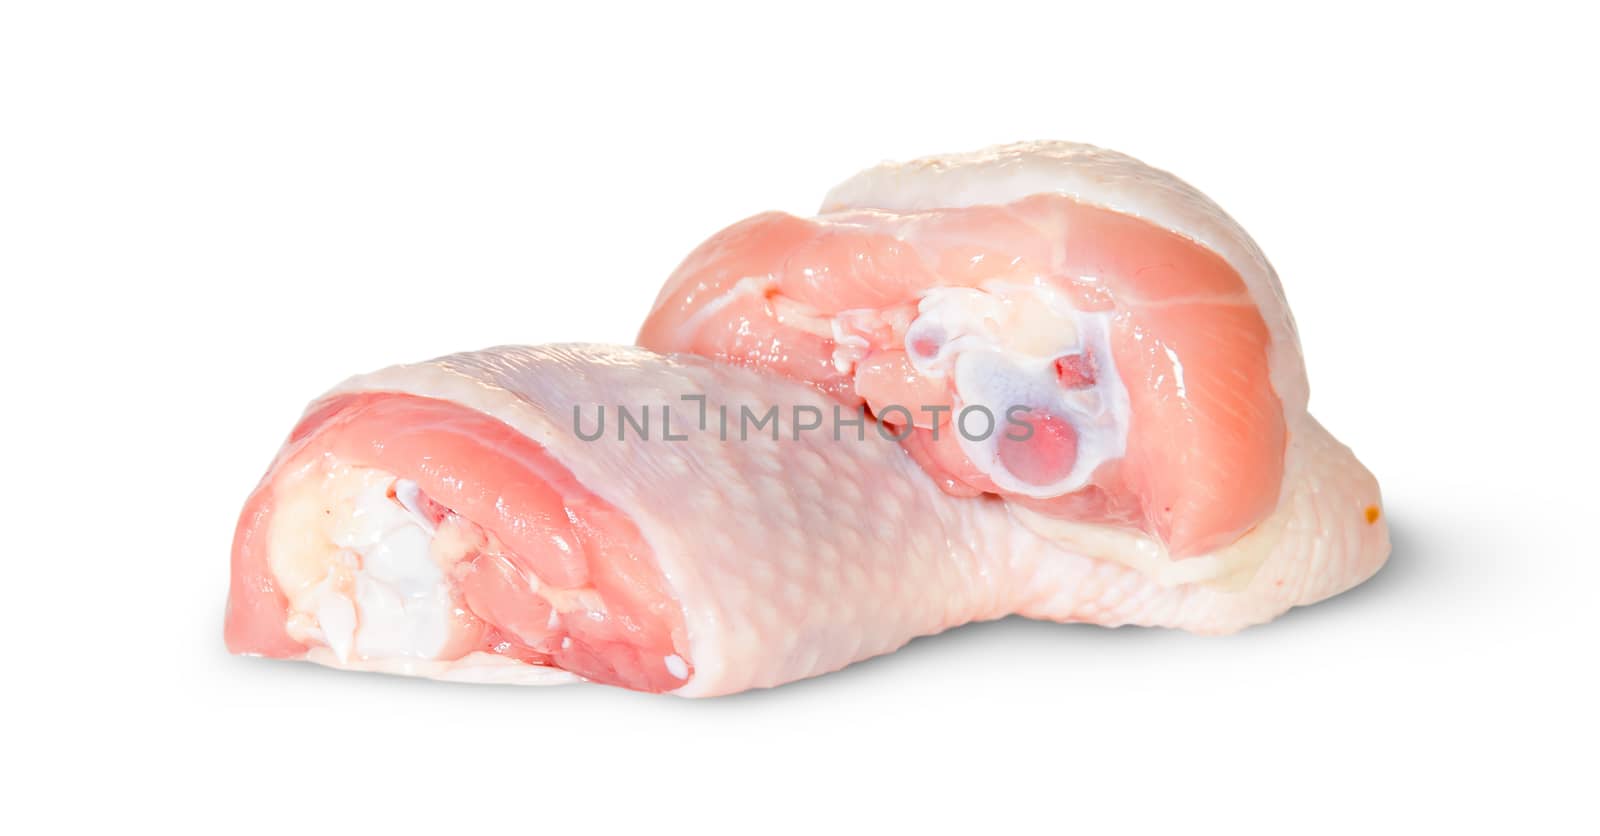 Two Raw Chicken Legs Lying On Each Other Isolated On White Background